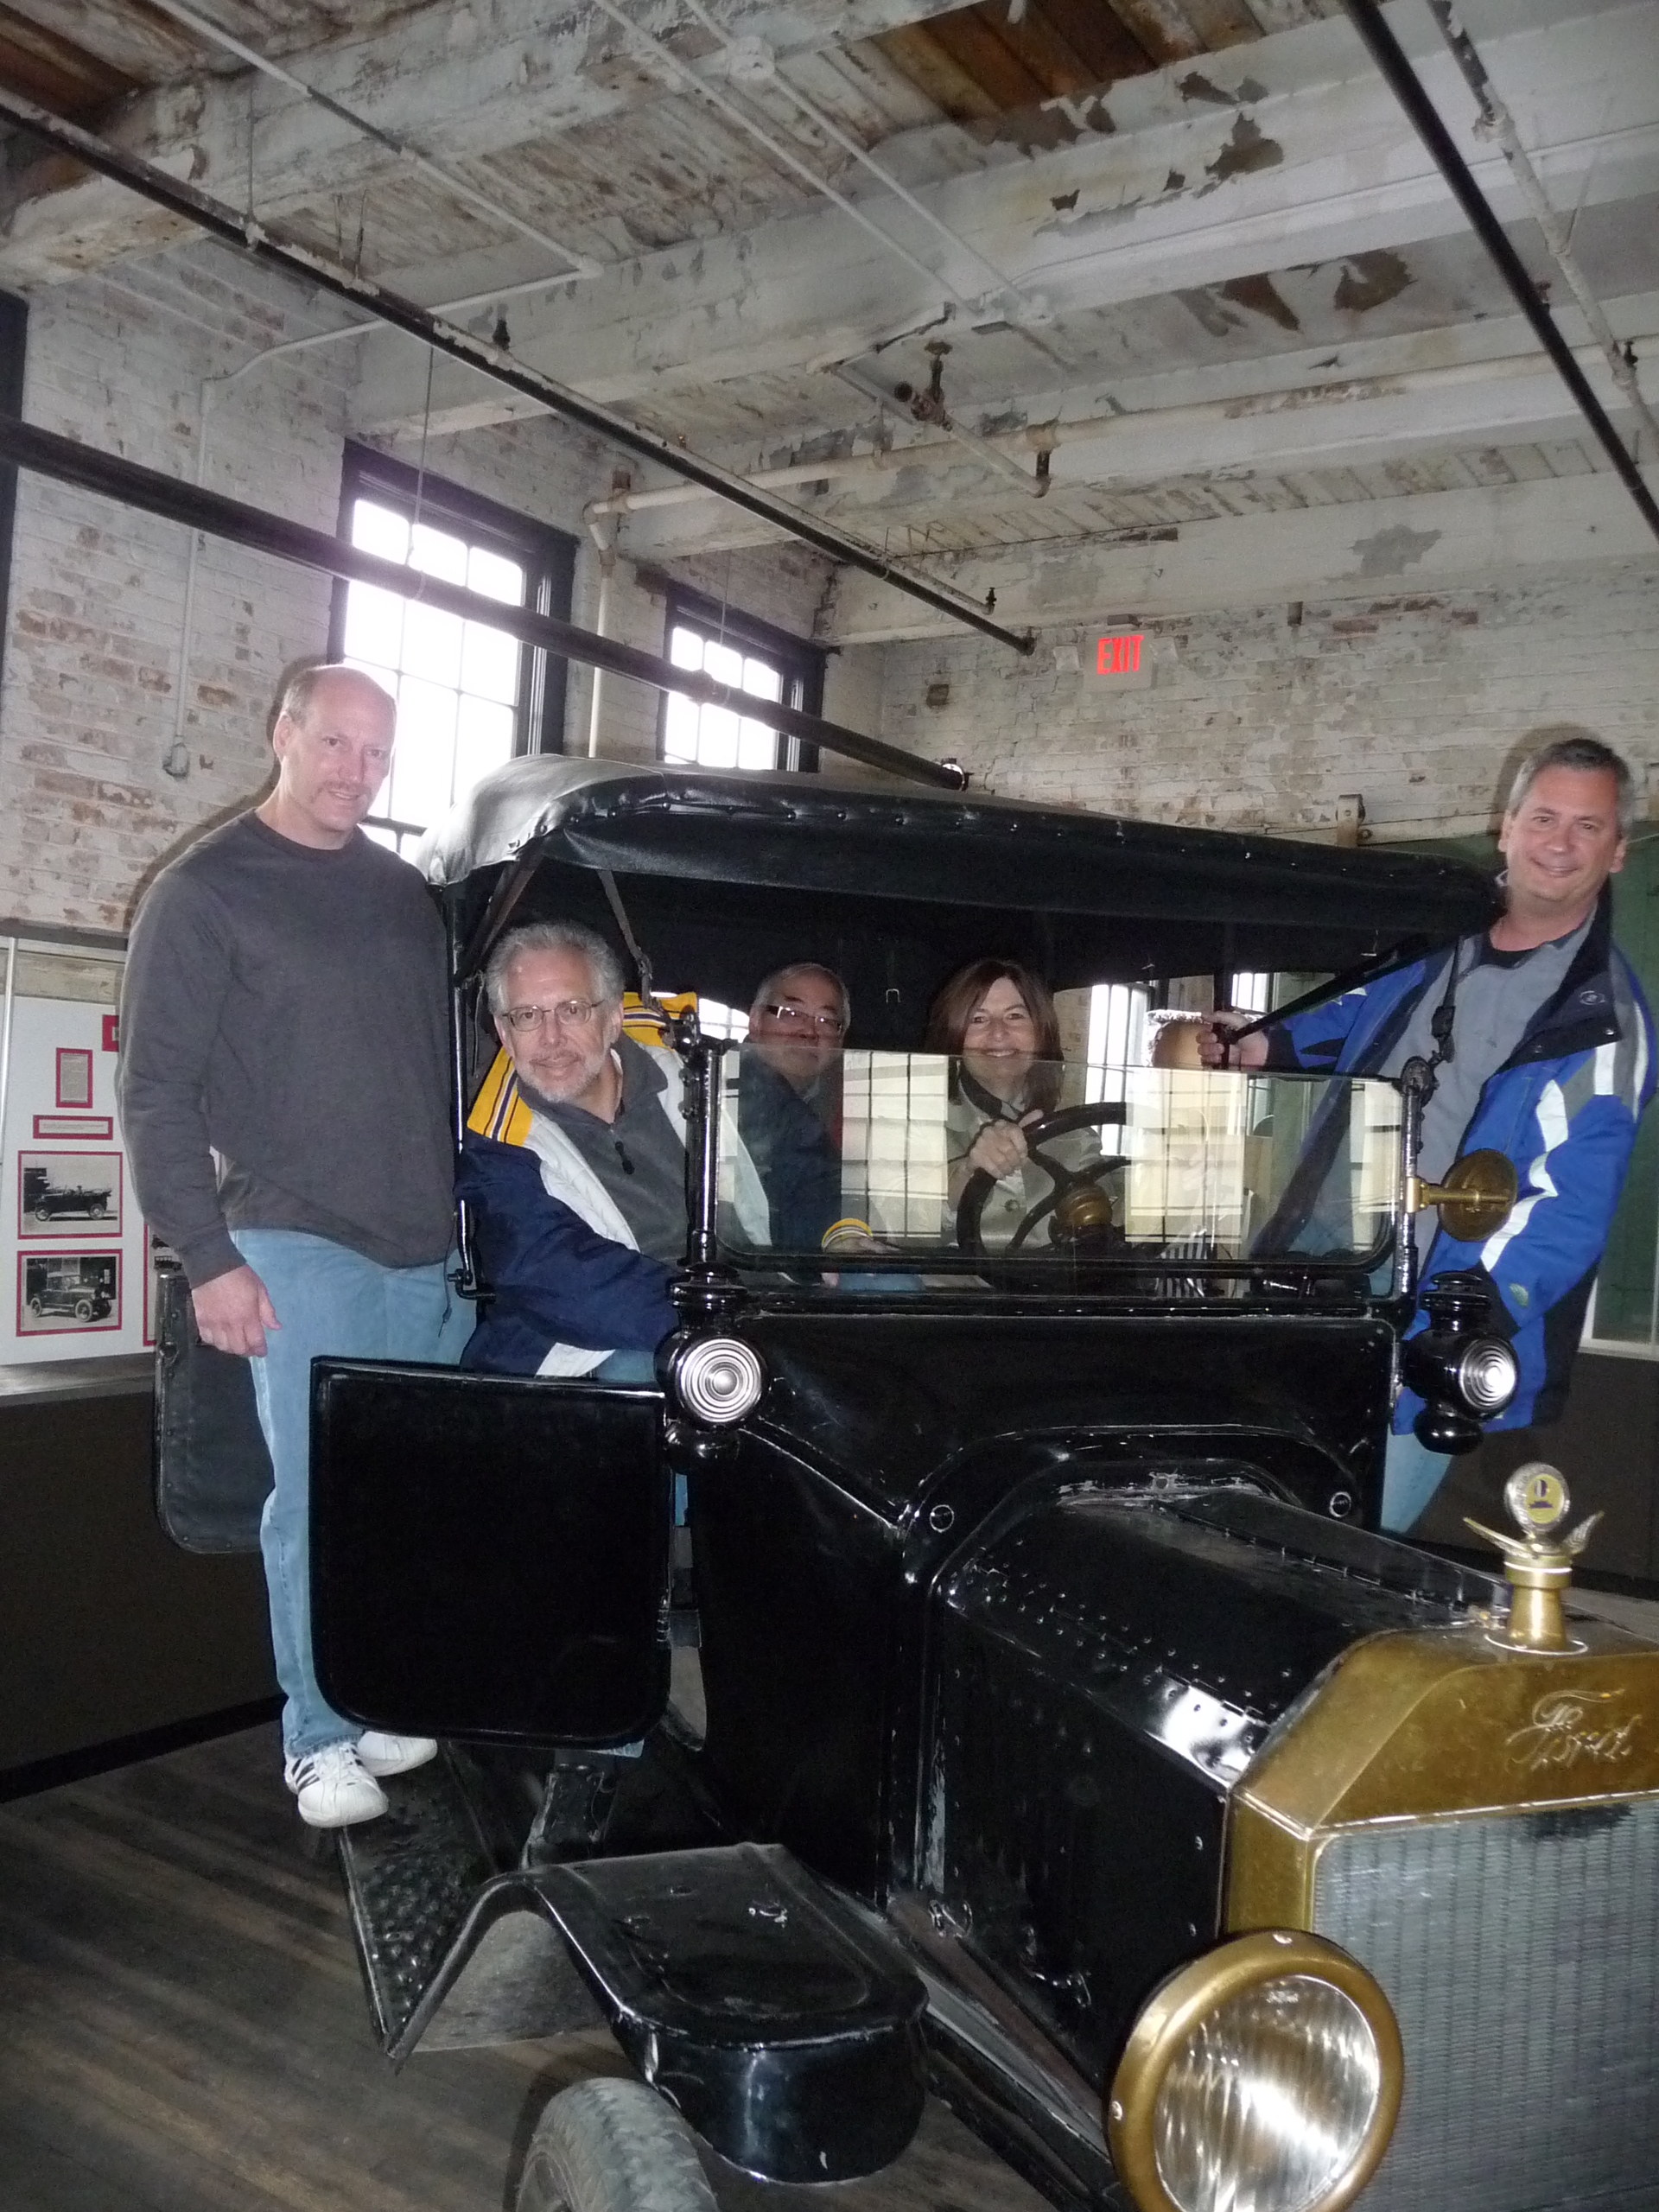 Touring the Ford Piquette Plant with Jim Huntzinger of Lean Frontiers, Jeff Liker, author, Marcos Chao, LEI China, and Diane Landsiedel, University of Michigan